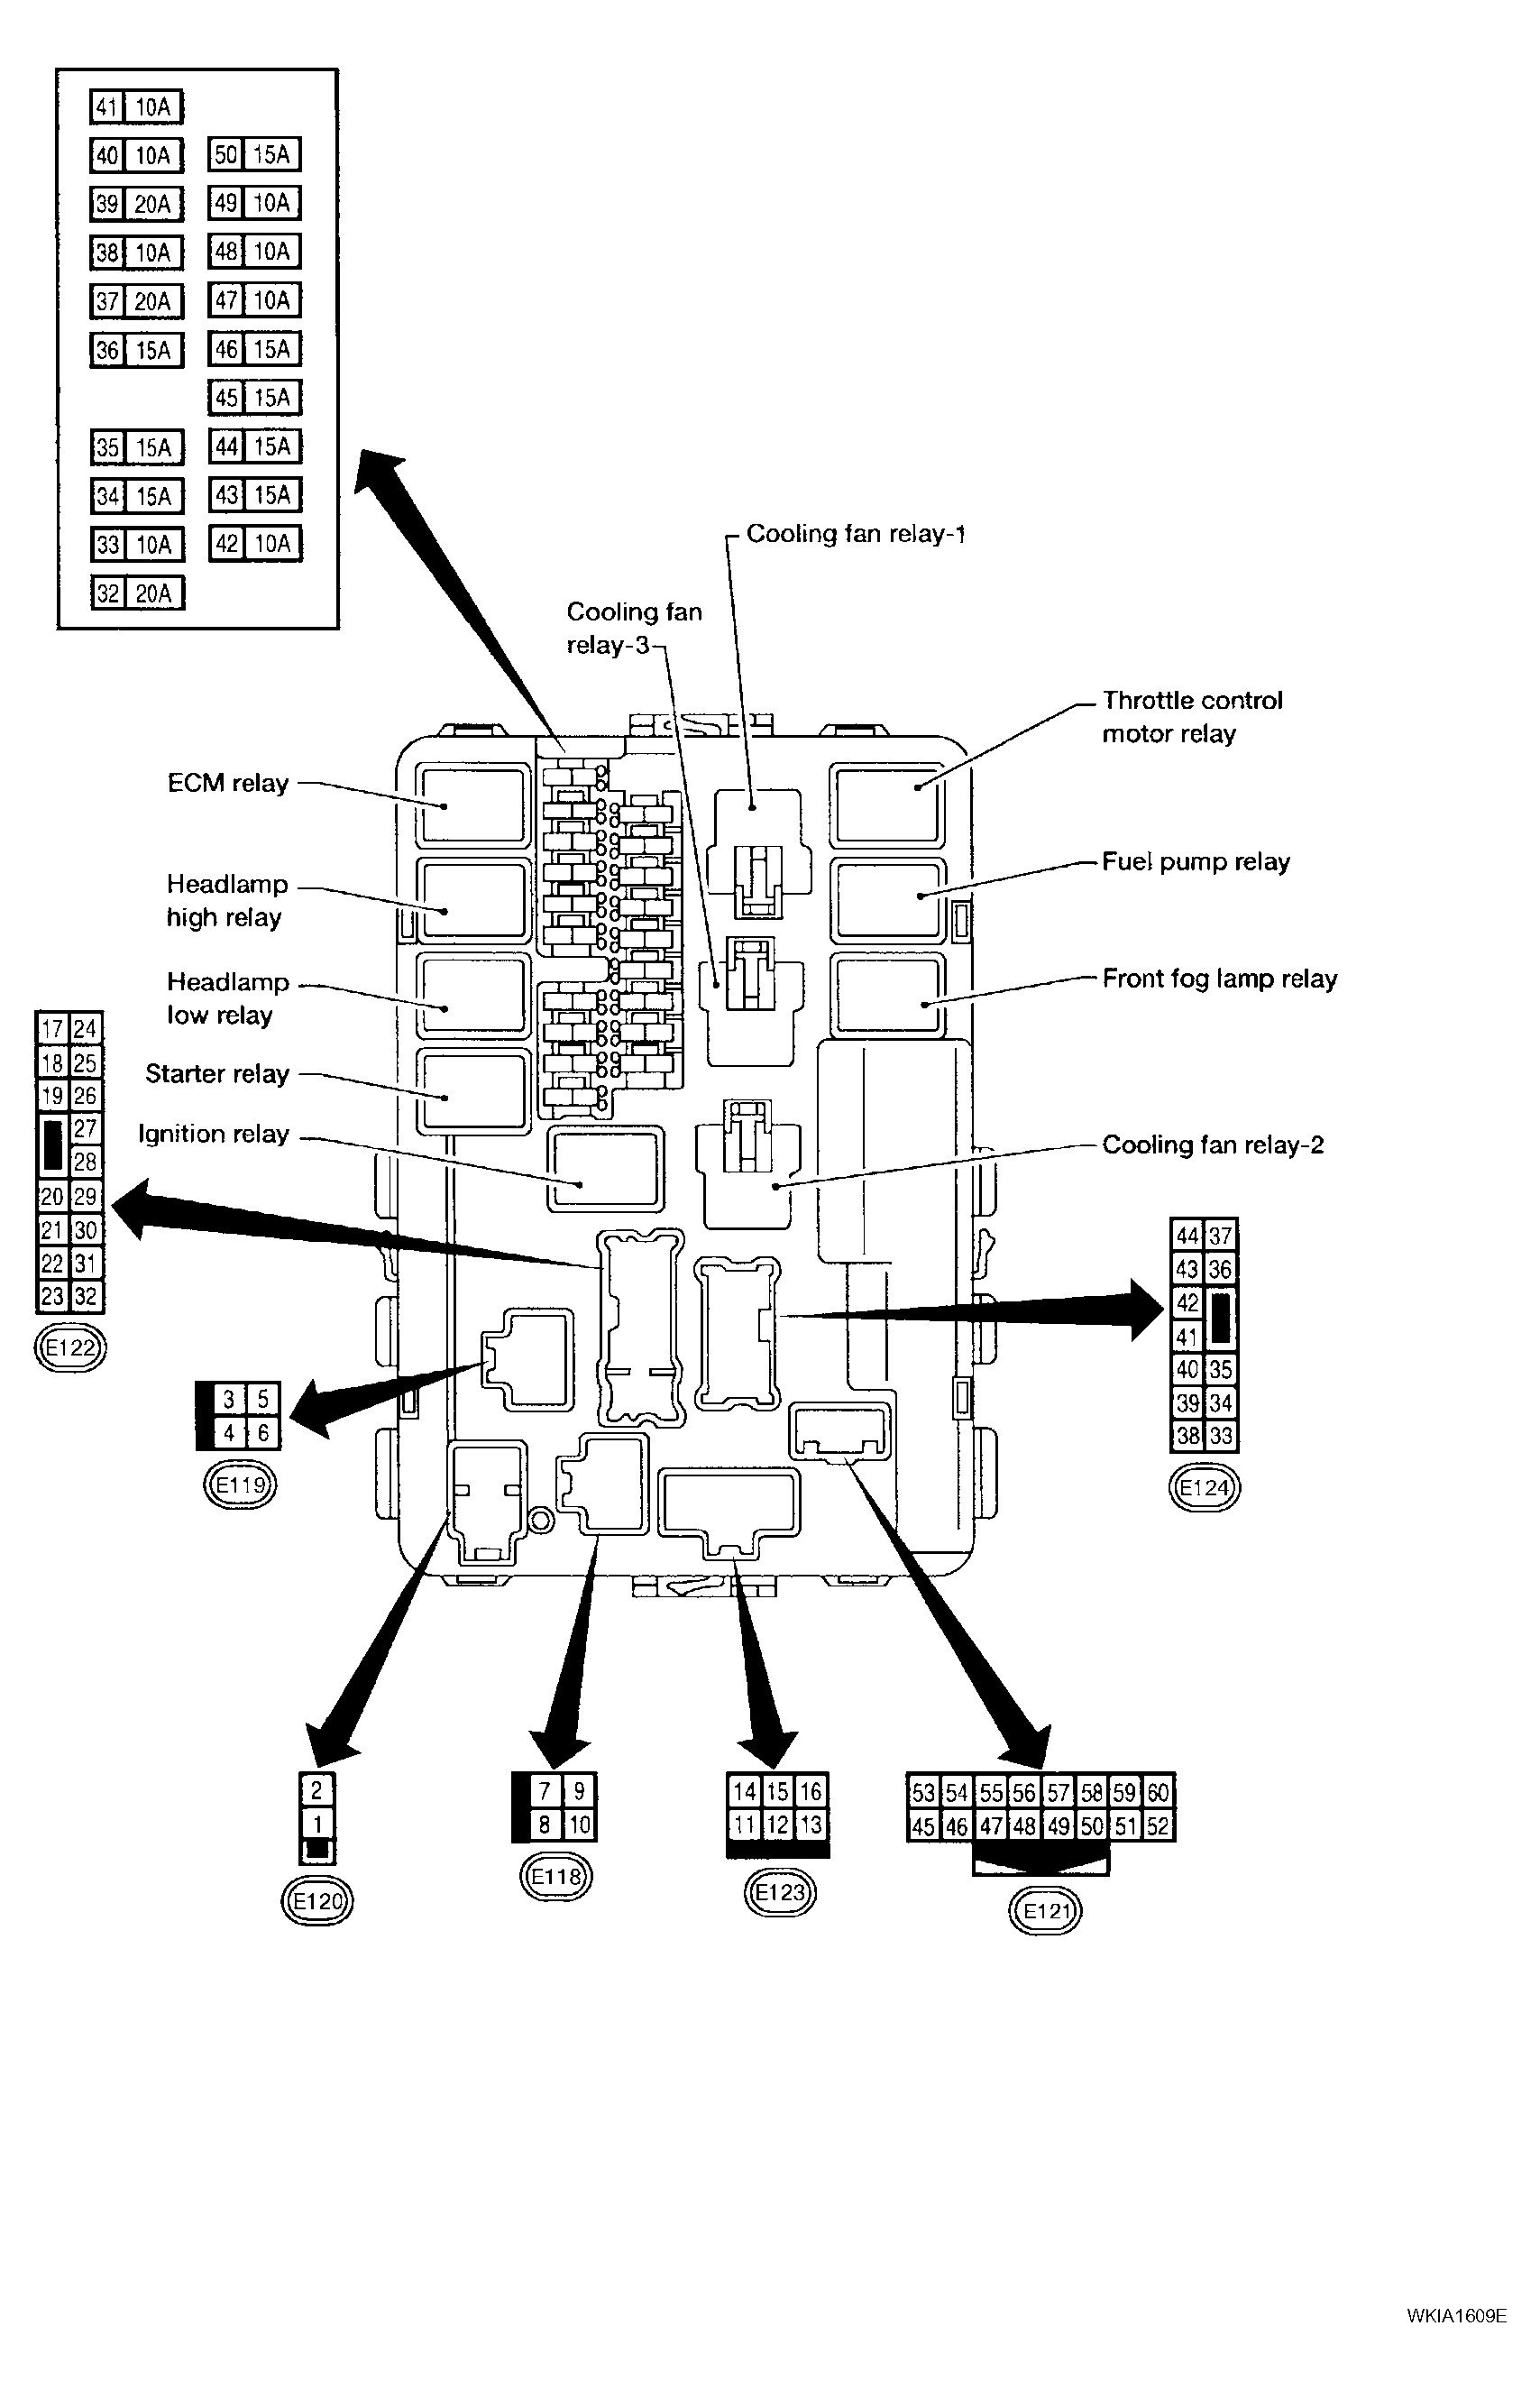 2010 Dodge Charger Engine Diagram 2006 Charger Fuse Box Of 2010 Dodge Charger Engine Diagram